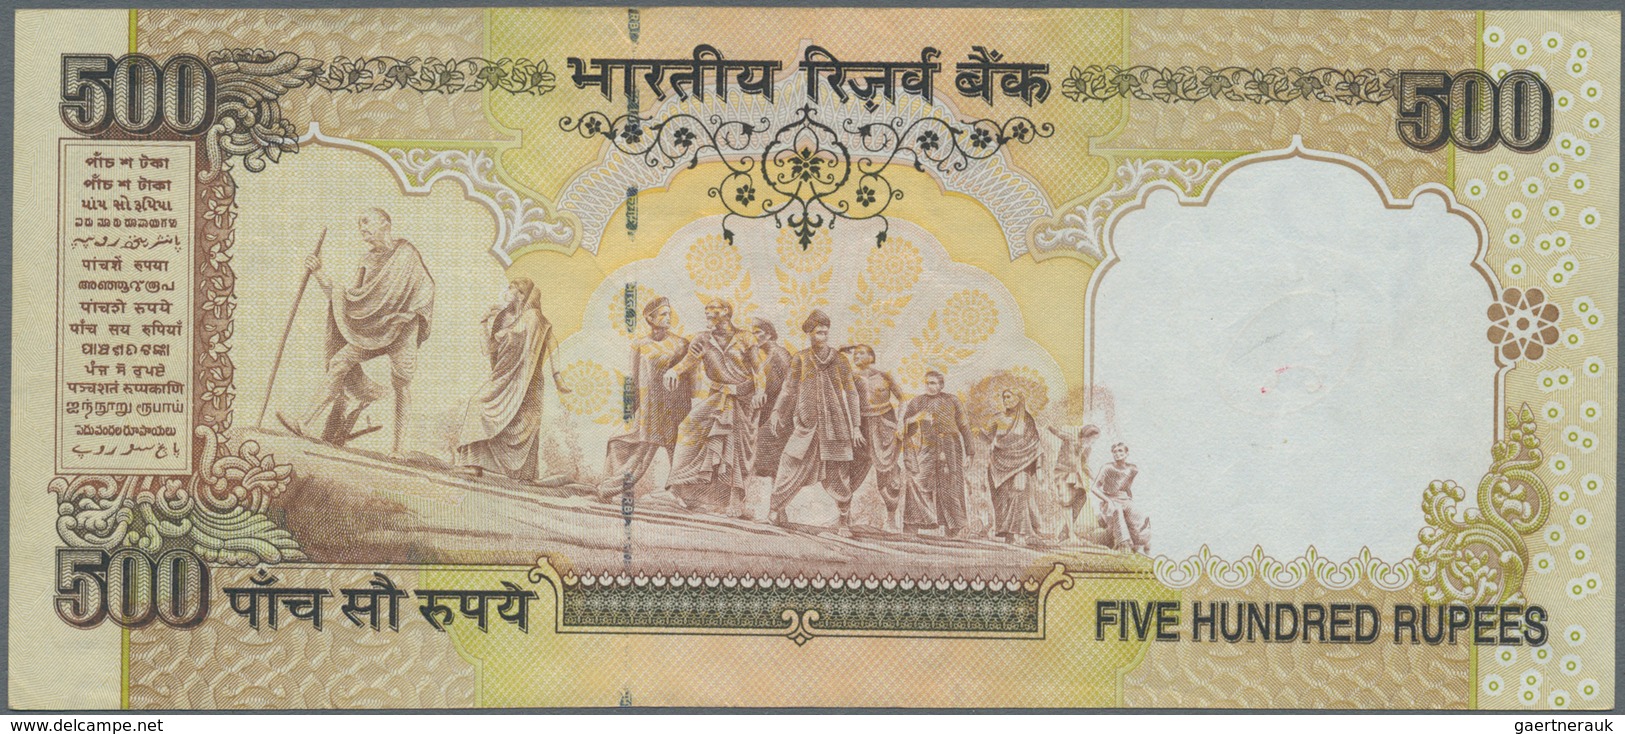 India / Indien: 500 Rupees ND P. 93 Error Note With Inverted Watermark In Paper, Light Handling In P - India